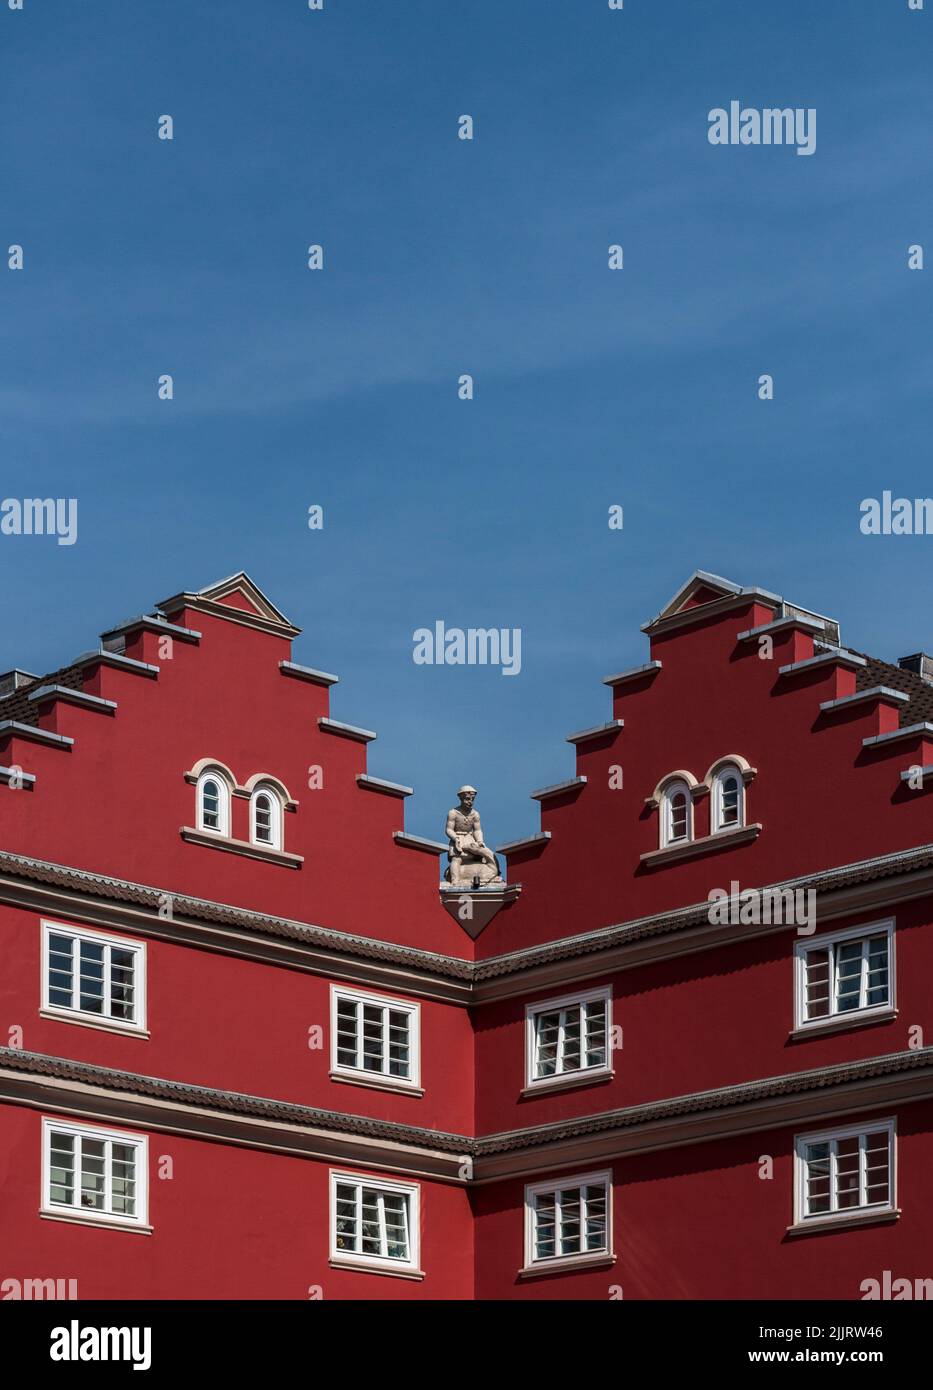 A vertical shot of two red buildings with sharp roofs in Aachen, Juelicher Strasse, Germany Stock Photo